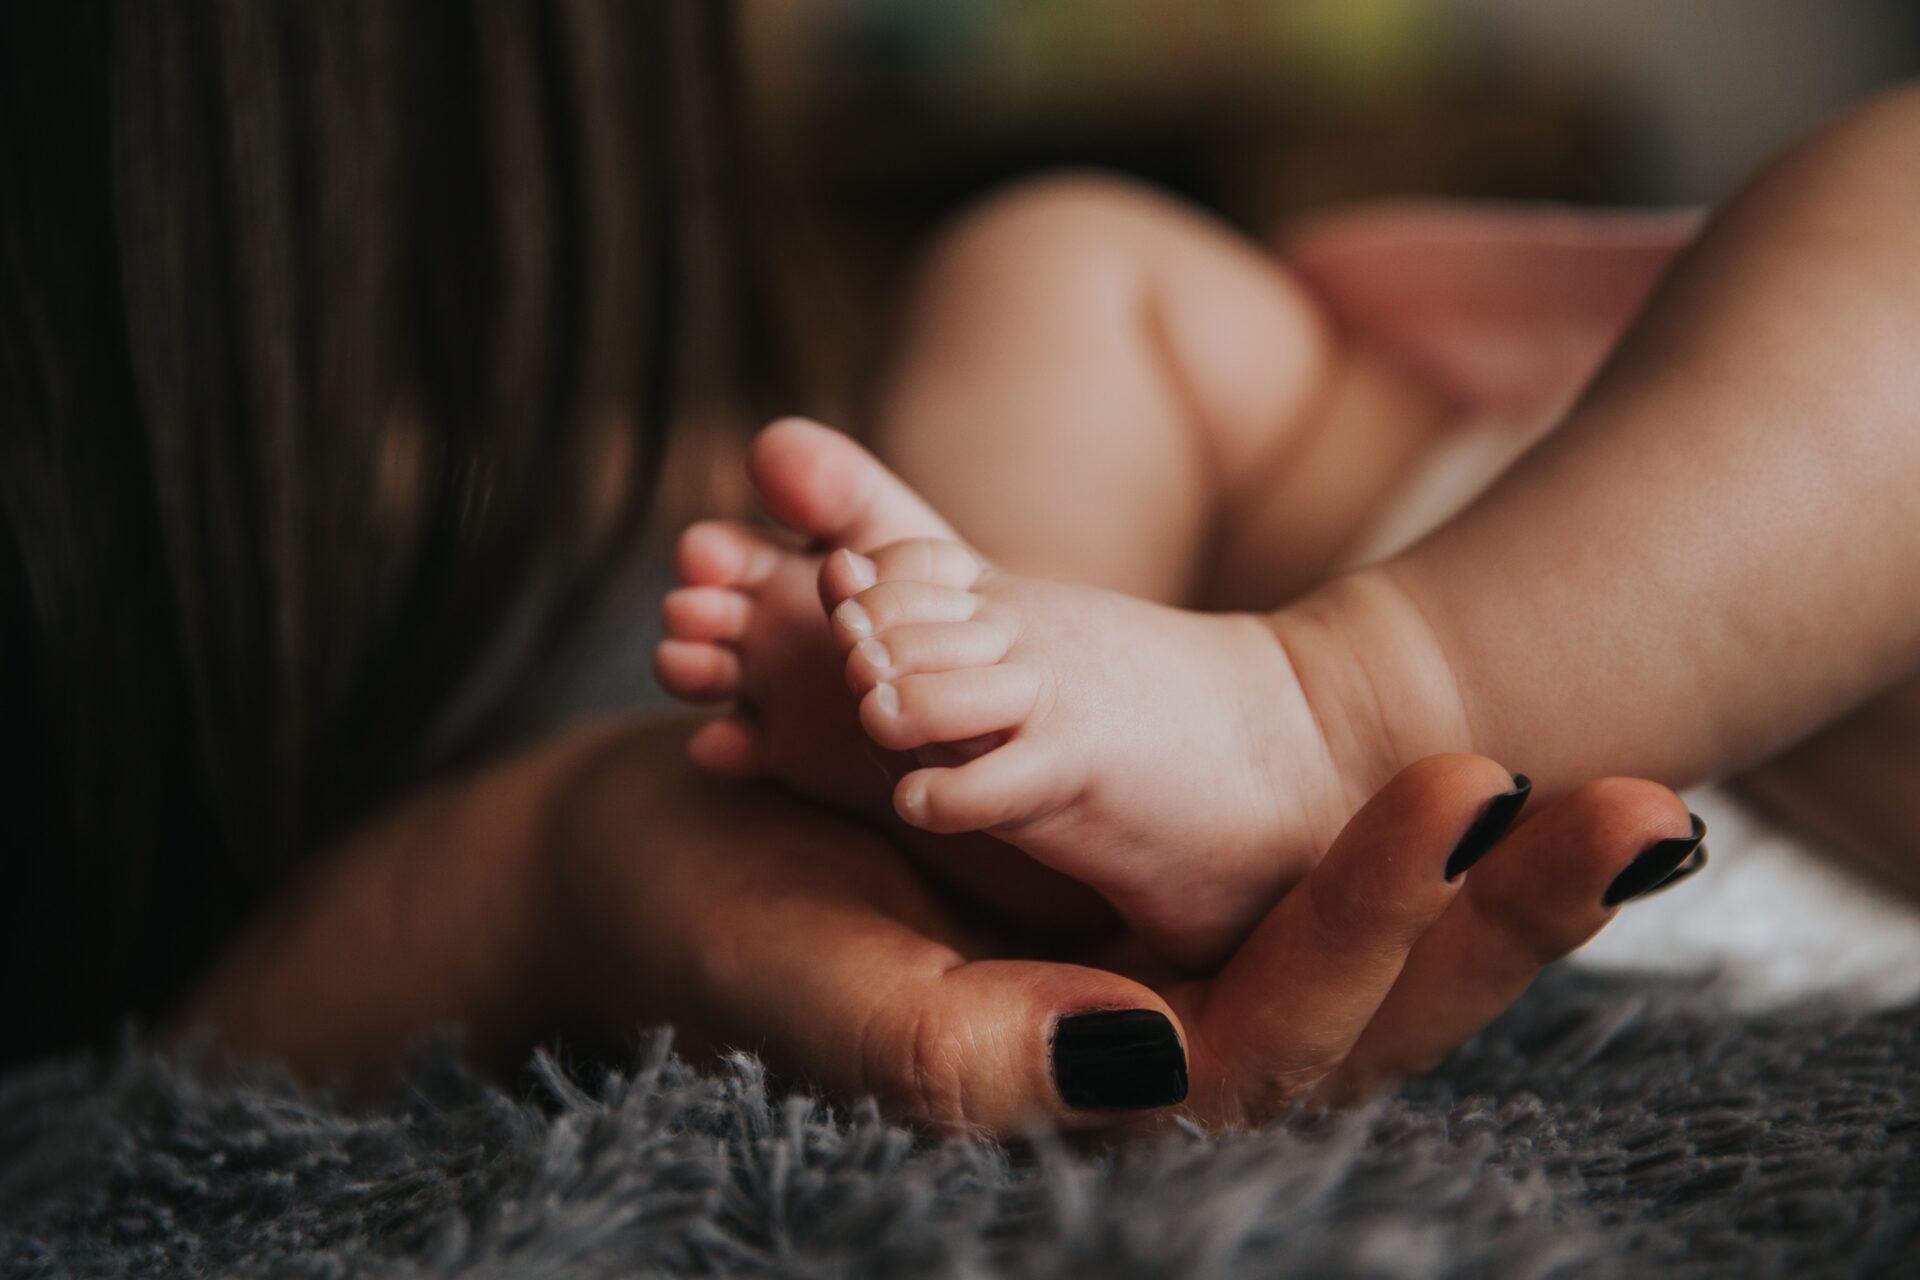 An infants foot being held by their mother.